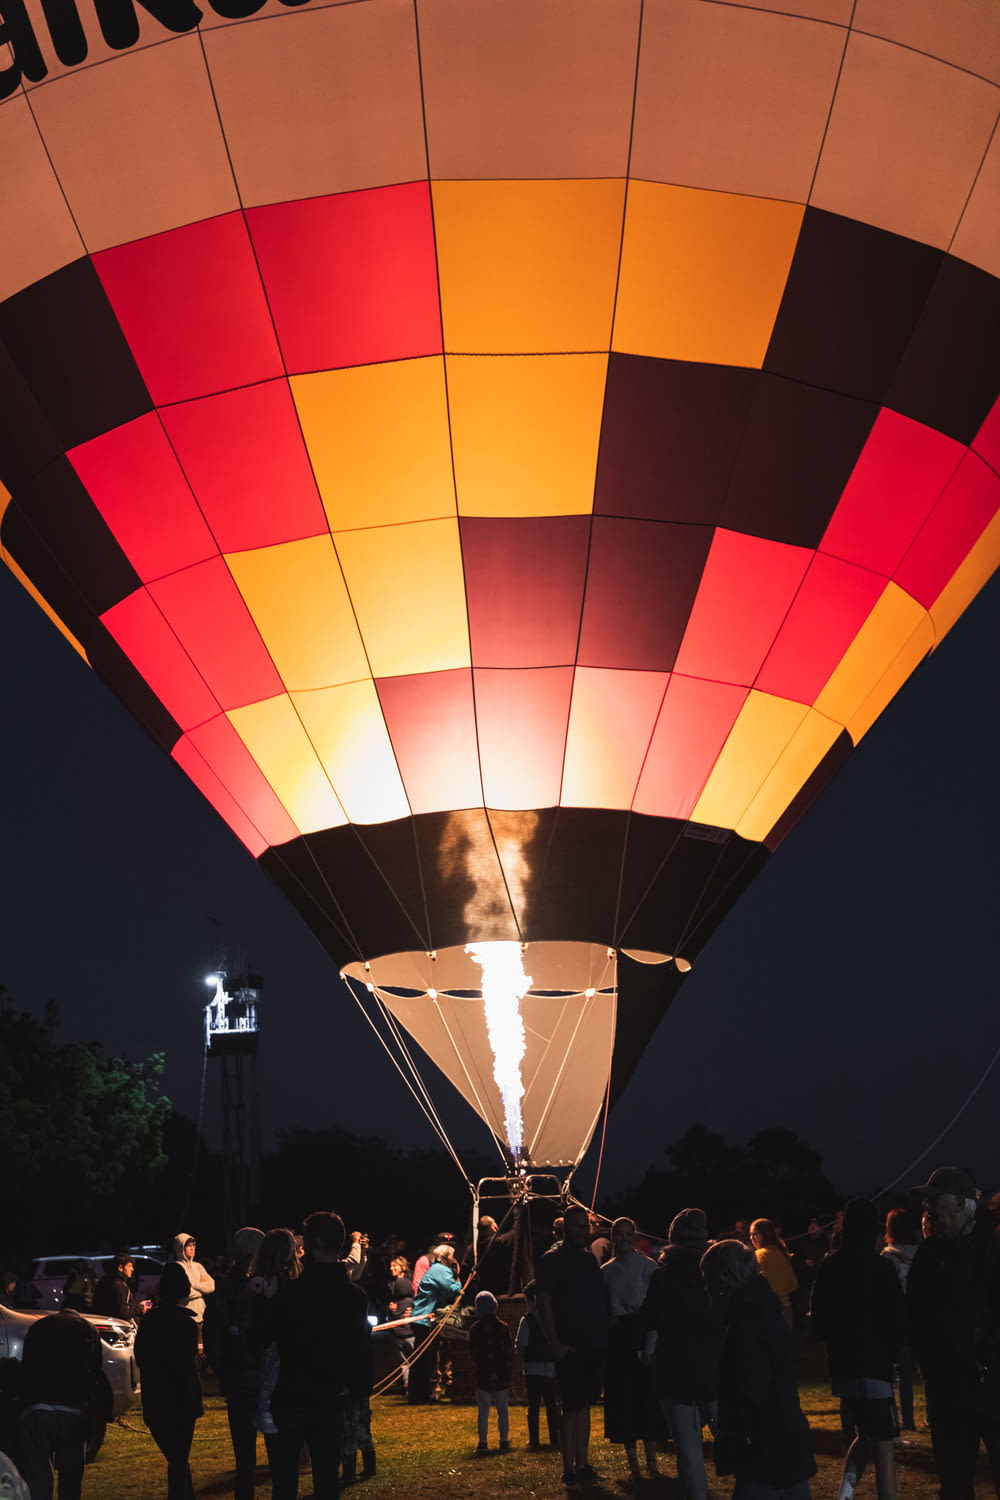 a group of people standing around a hot air balloon